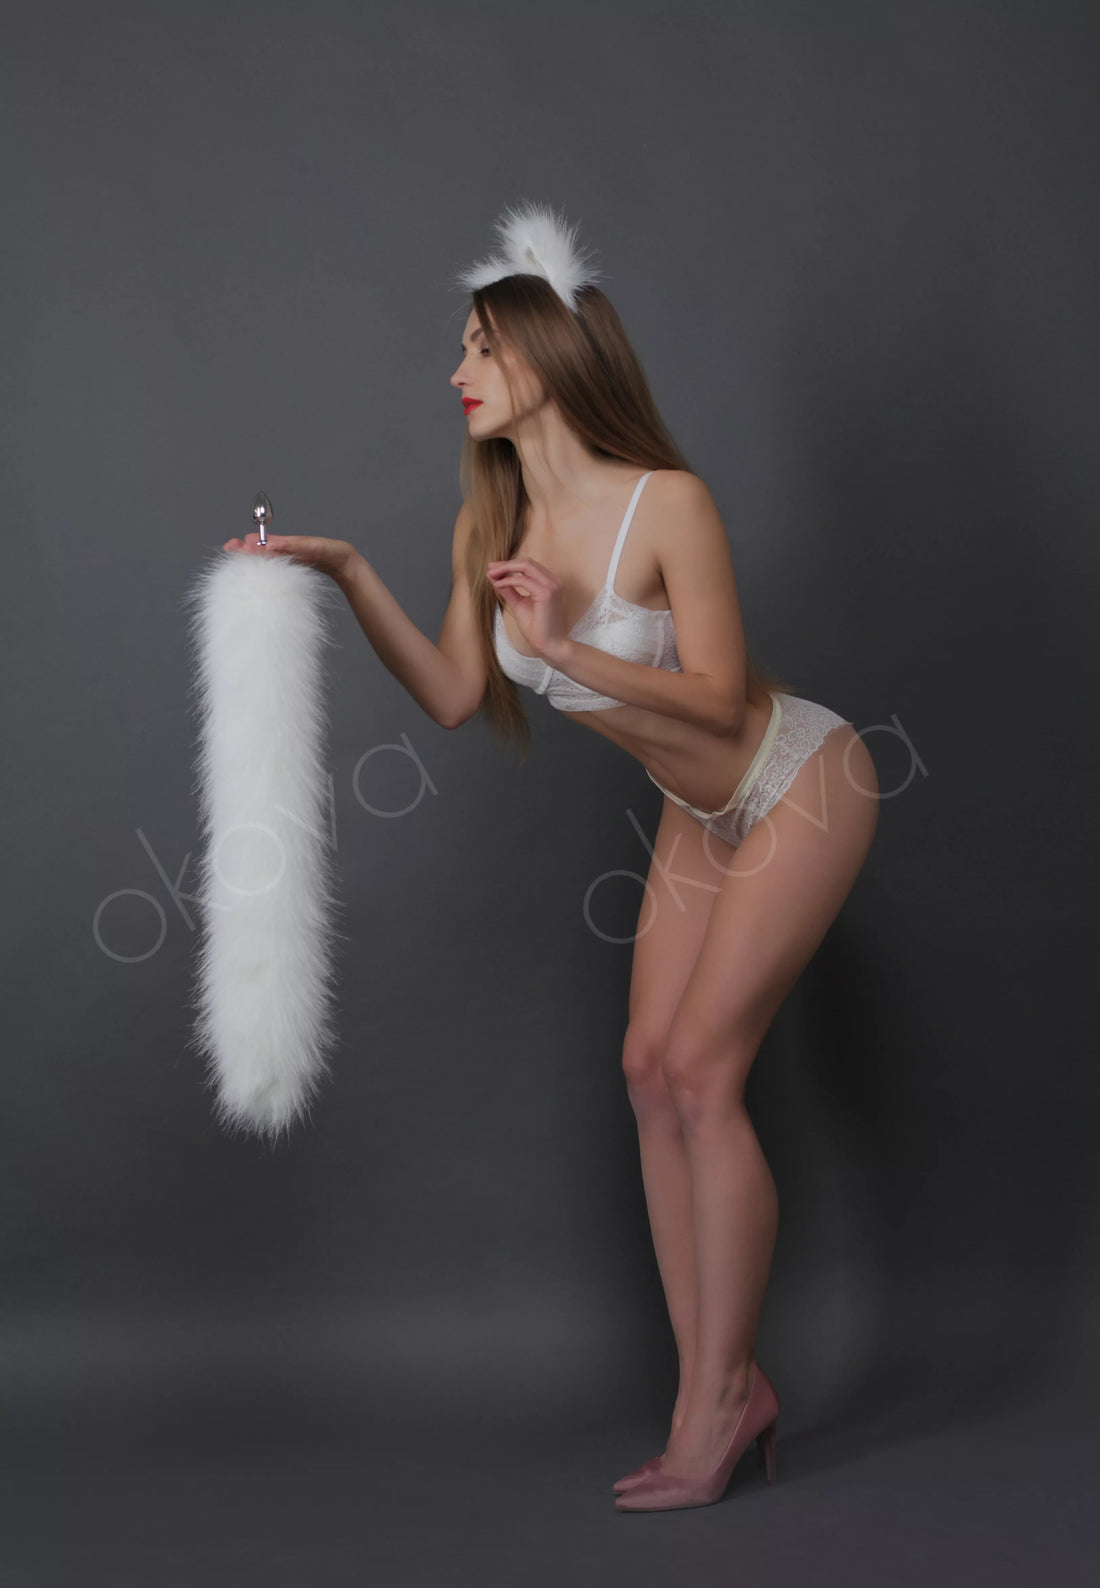 Cat tail butt plug white and cat ears white 29"